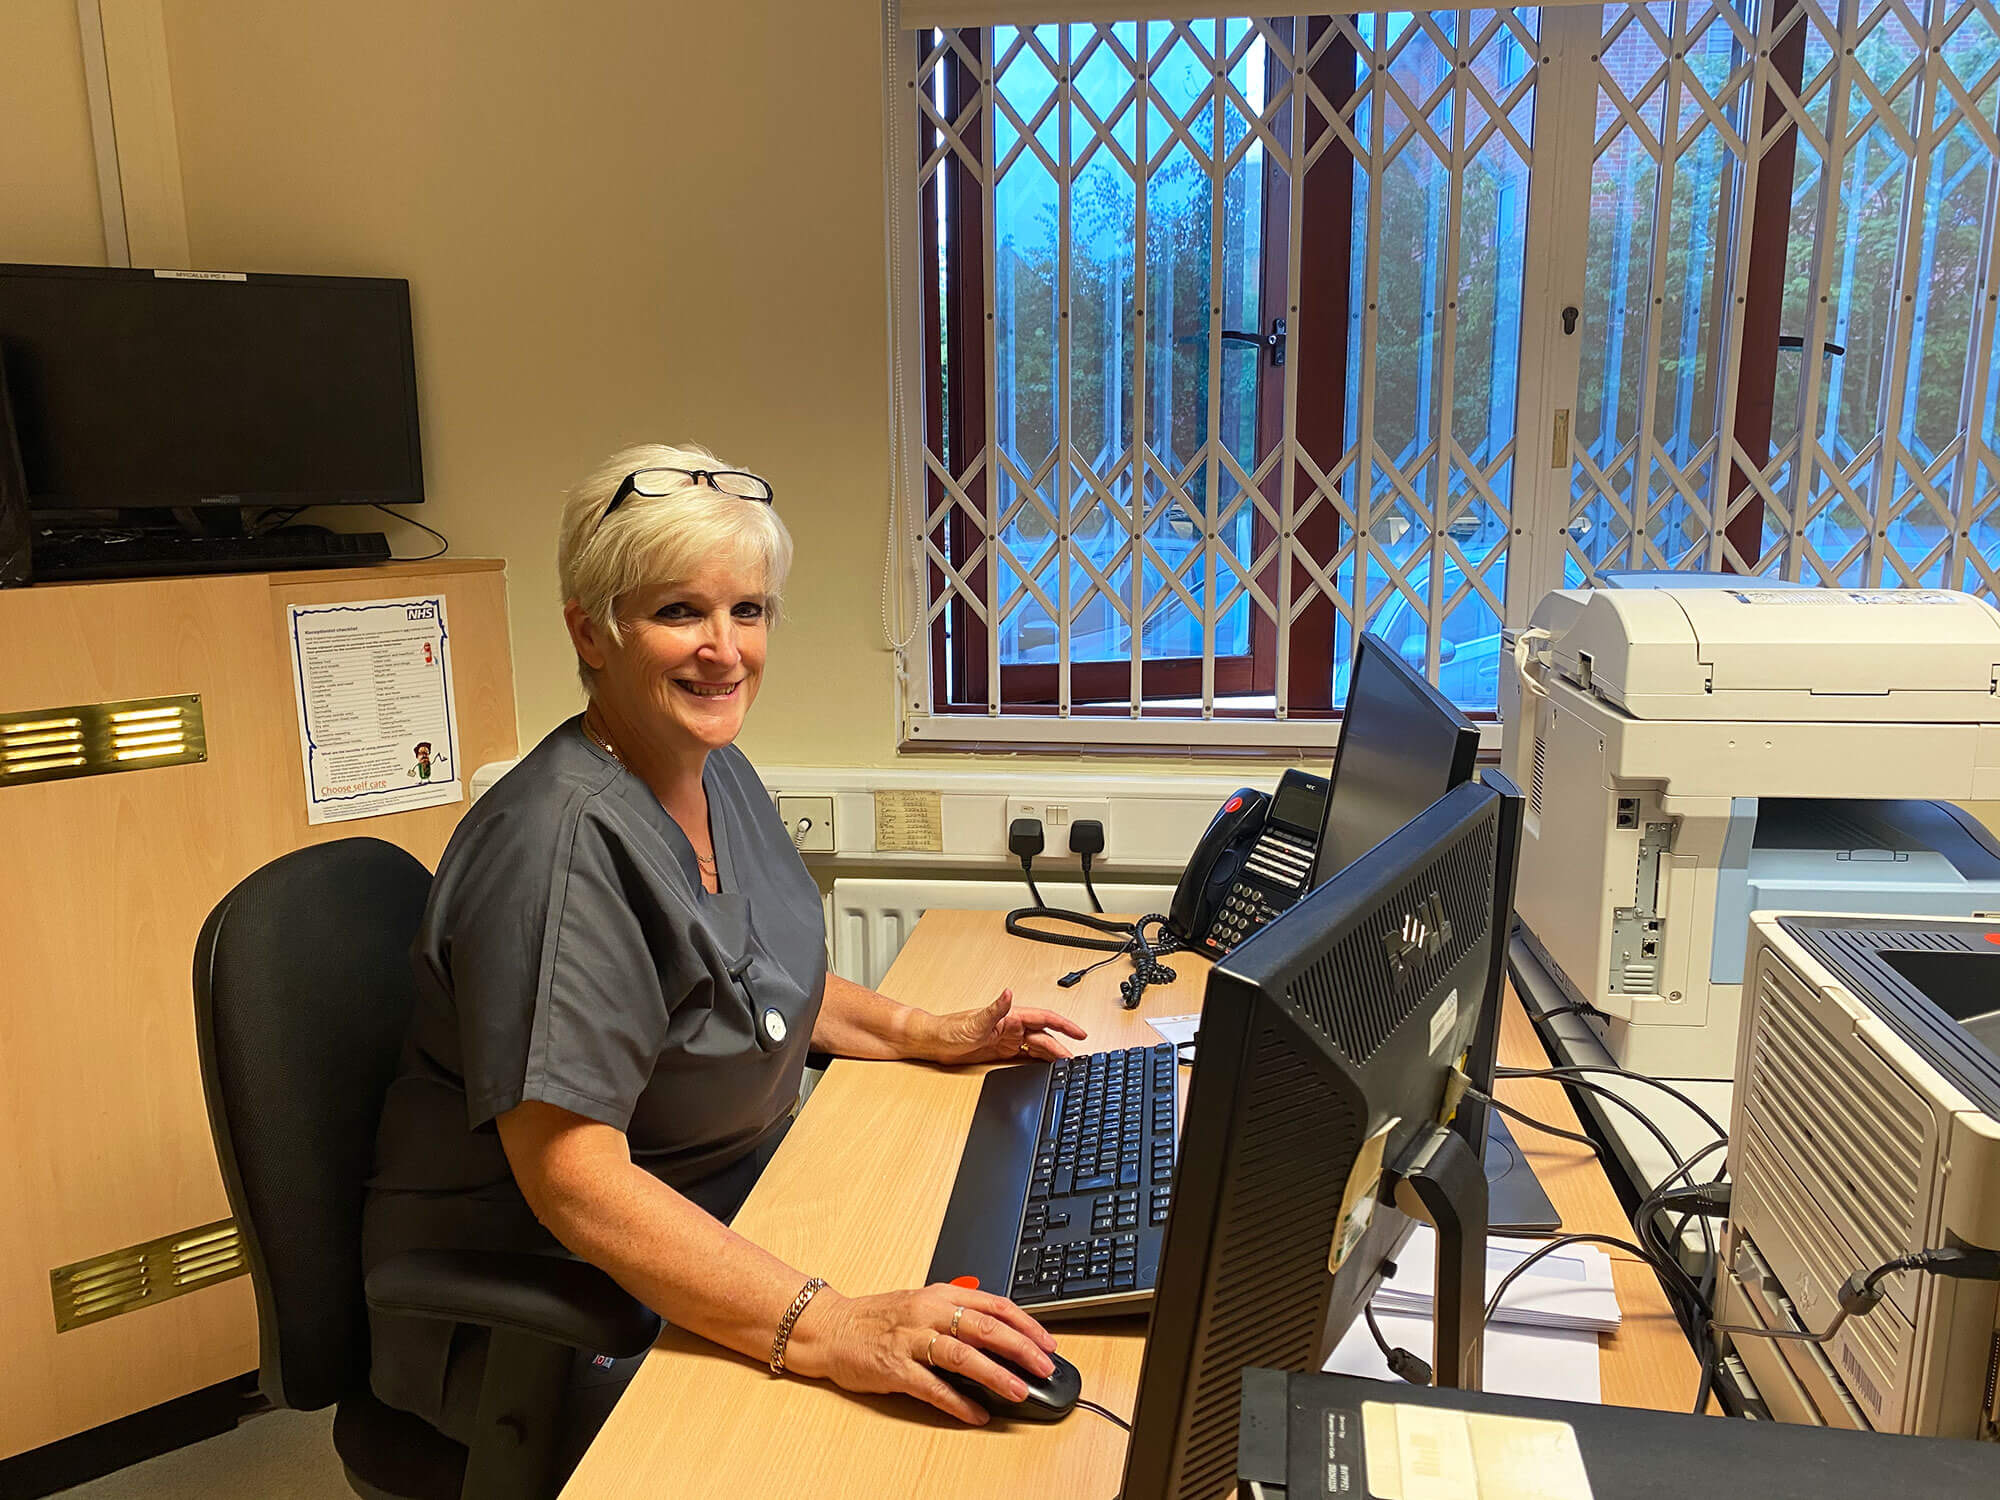 A Moorcroft Medical Centre receptionist sitting at a desk, smiling at the camera